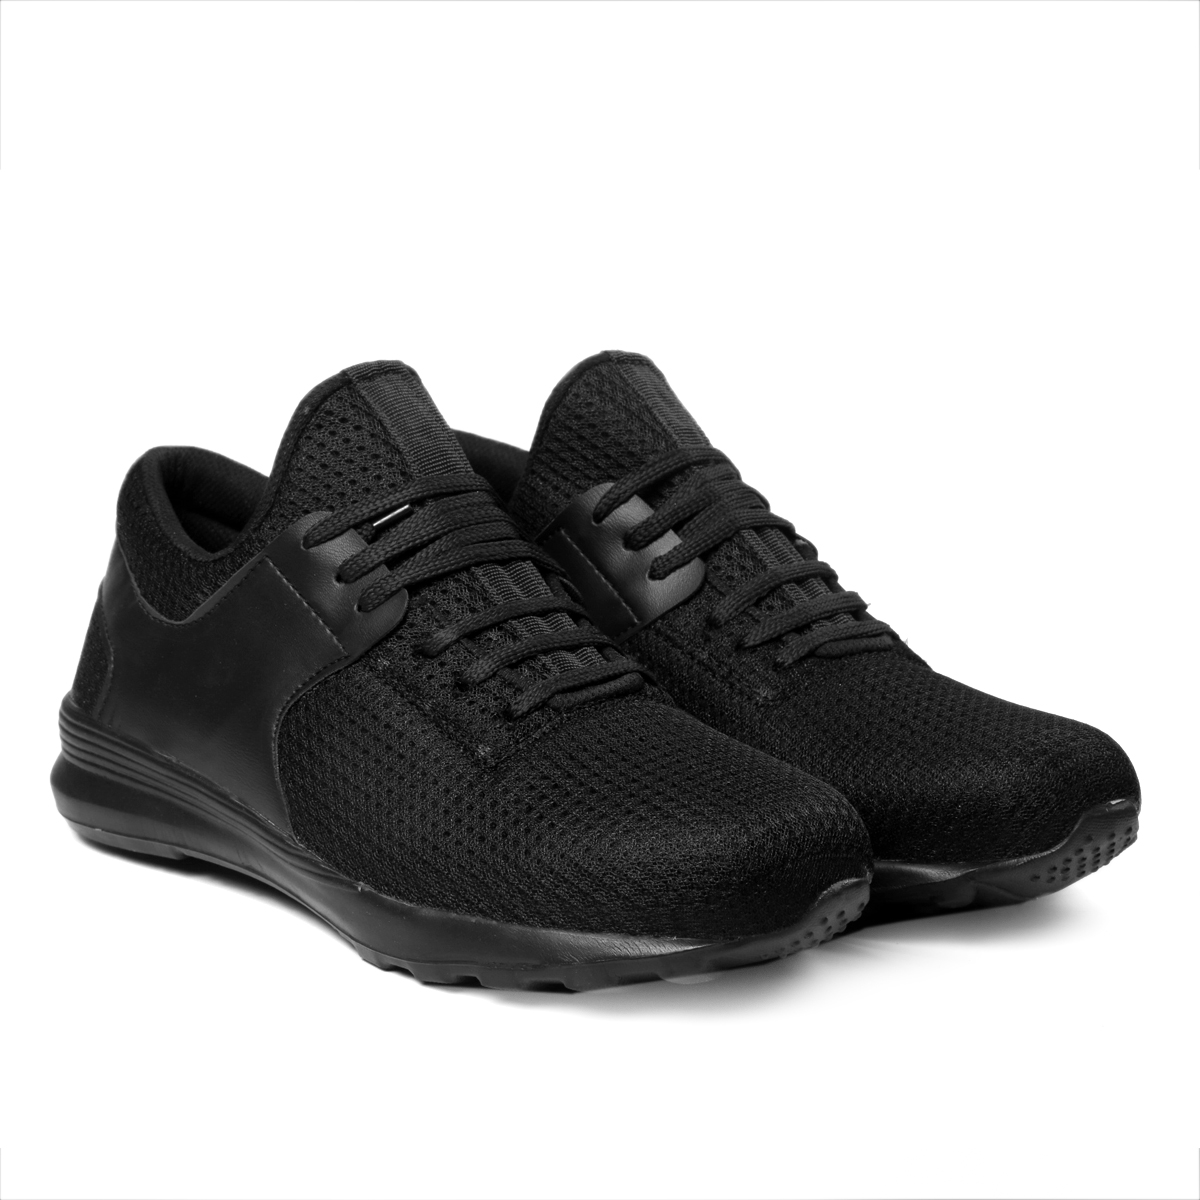 Buy Brooke Men's Stylish Comfort Casual Shoes Online @ ₹1298 from ShopClues